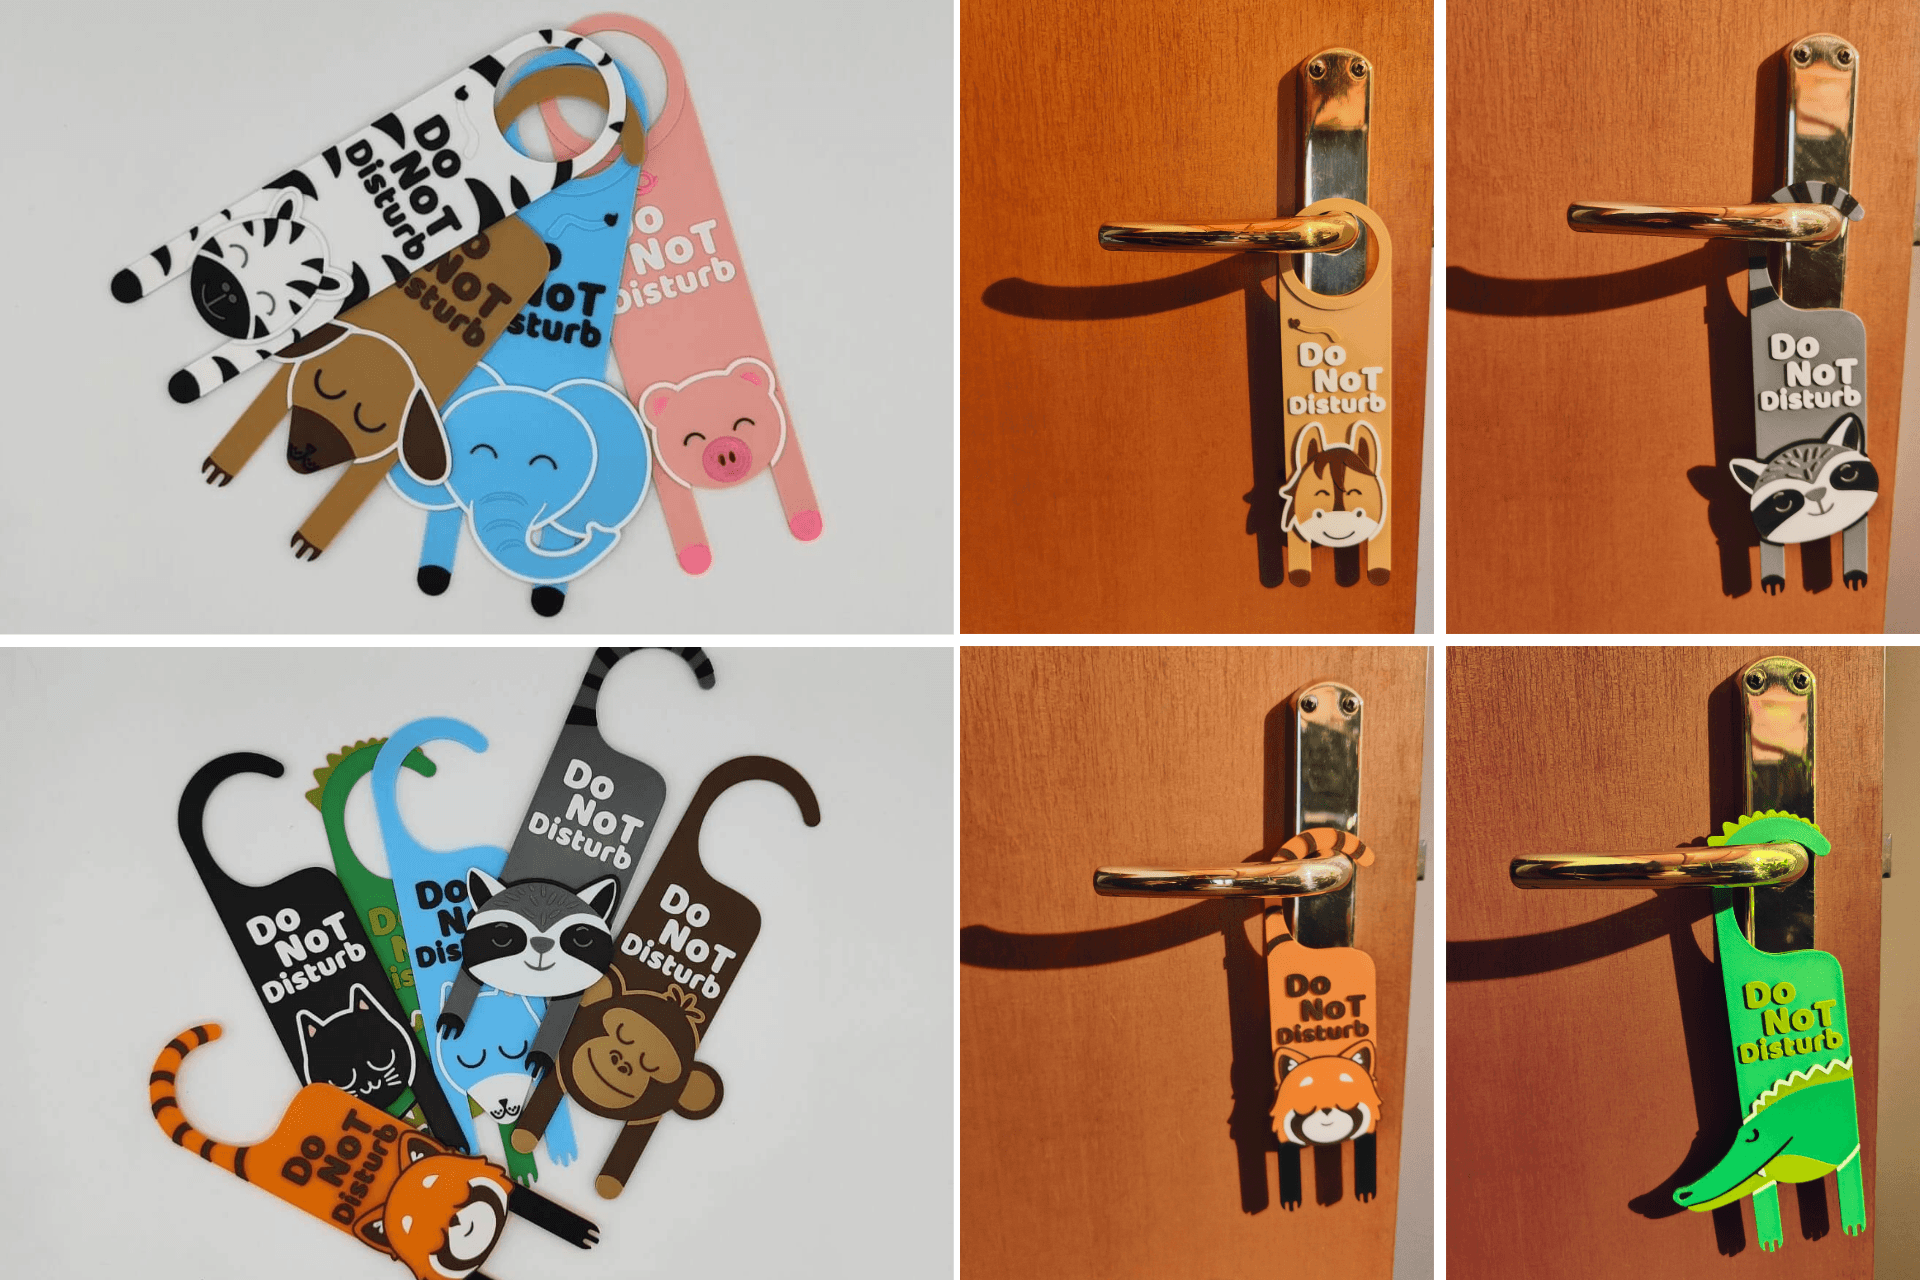 Slumber Safari: Adorable 'Do Not Disturb' signs for dreamy downtime